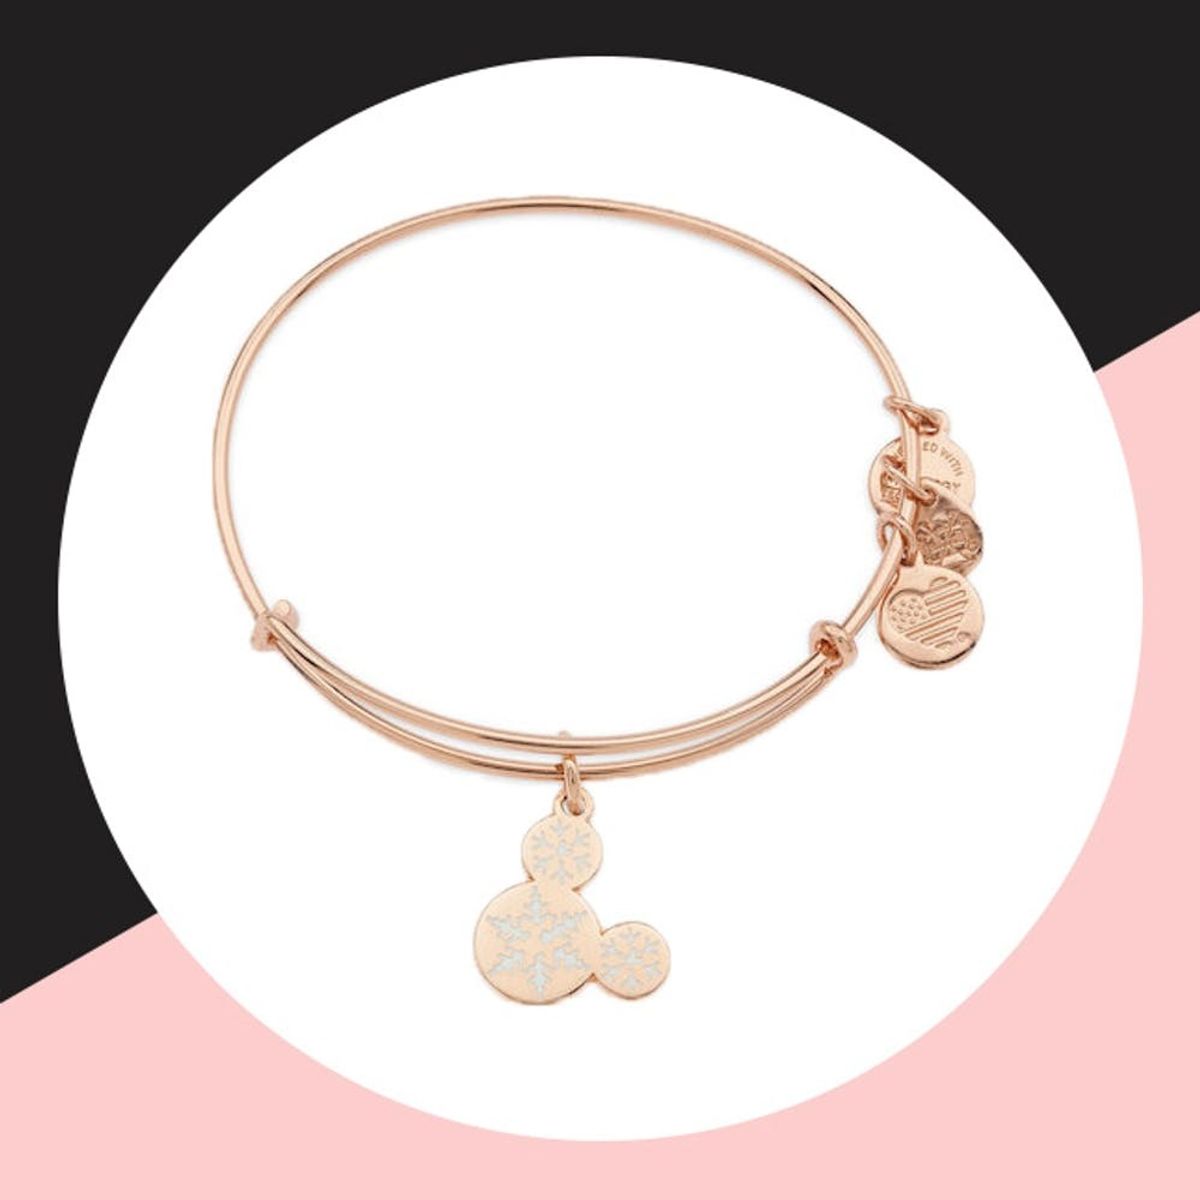 Alex and Ani’s Rose Gold Disney Bracelet Is All We Want for Christmas